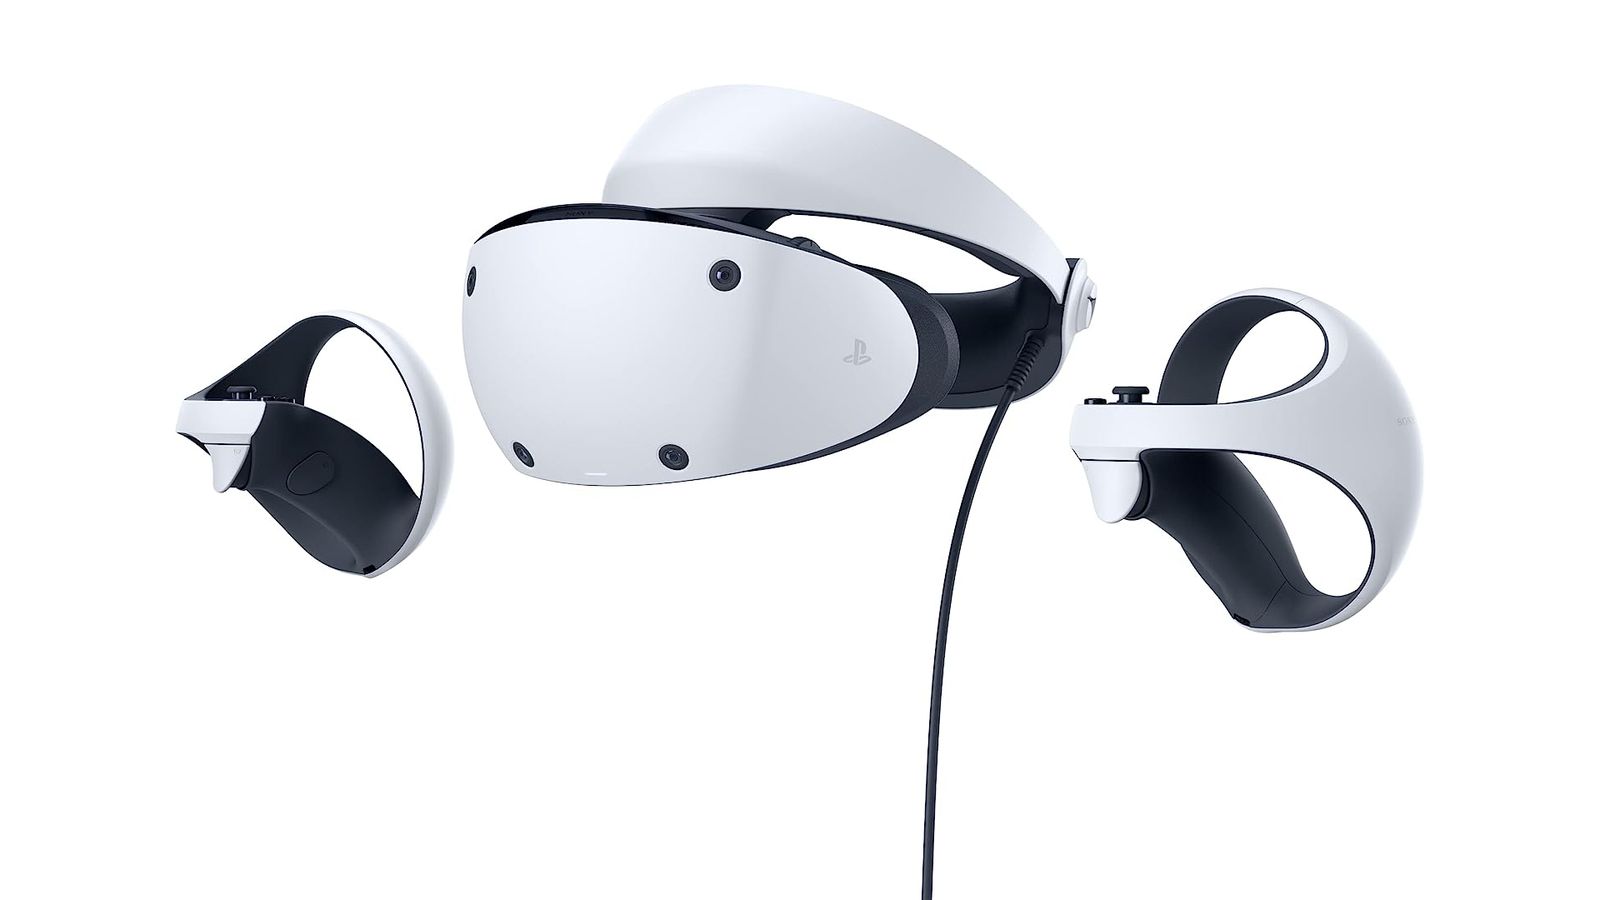 Sony PlayStation VR2 product image of a white and black wired VR headset with two white controllers either side.